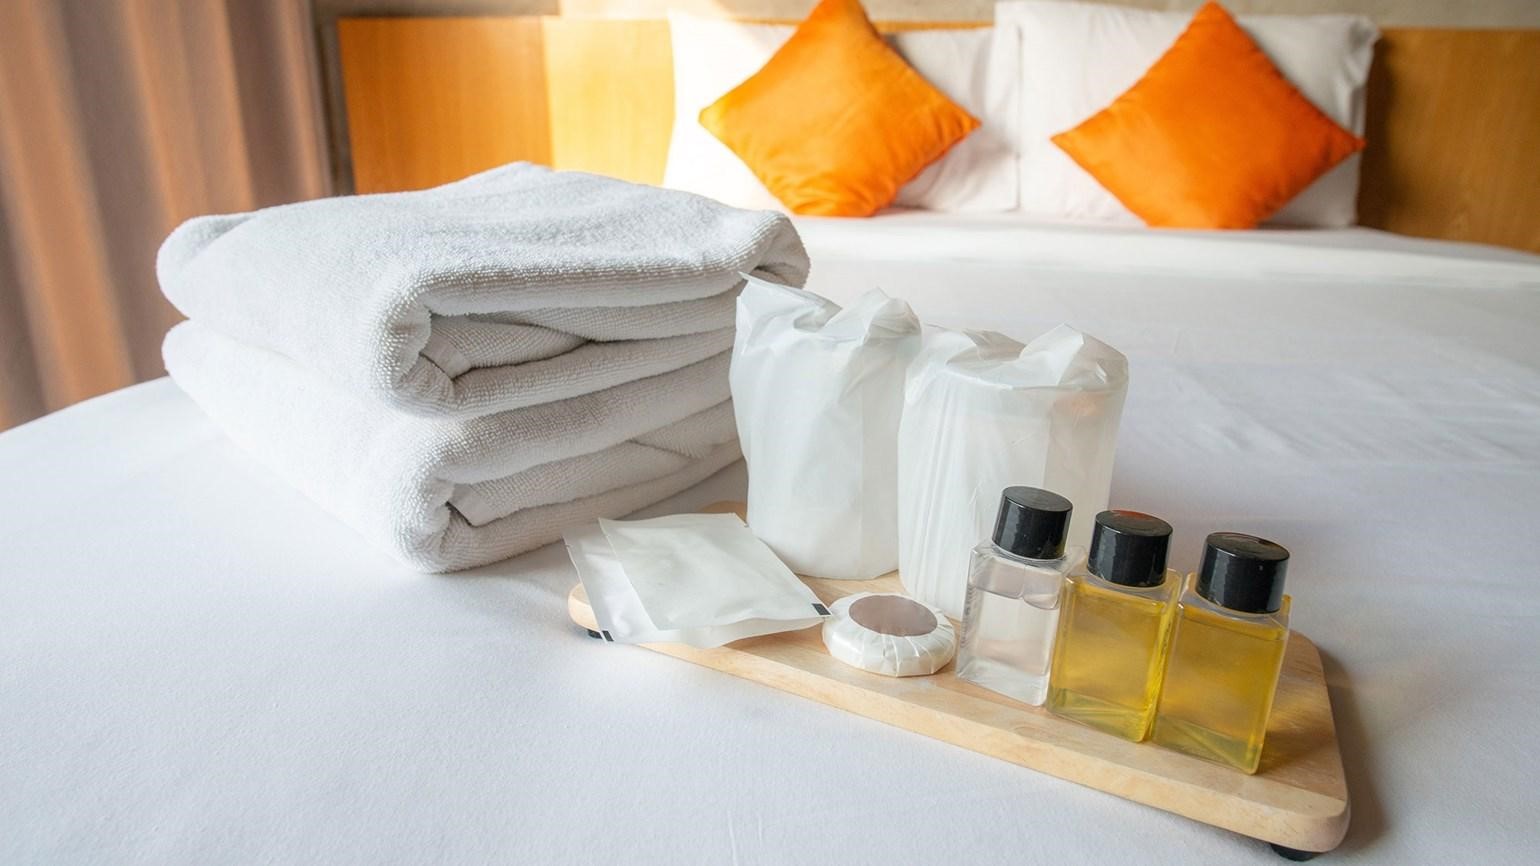 WHAT ARE THE BEST HOTEL AMENITIES TO IMPRESS YOUR GUEST?